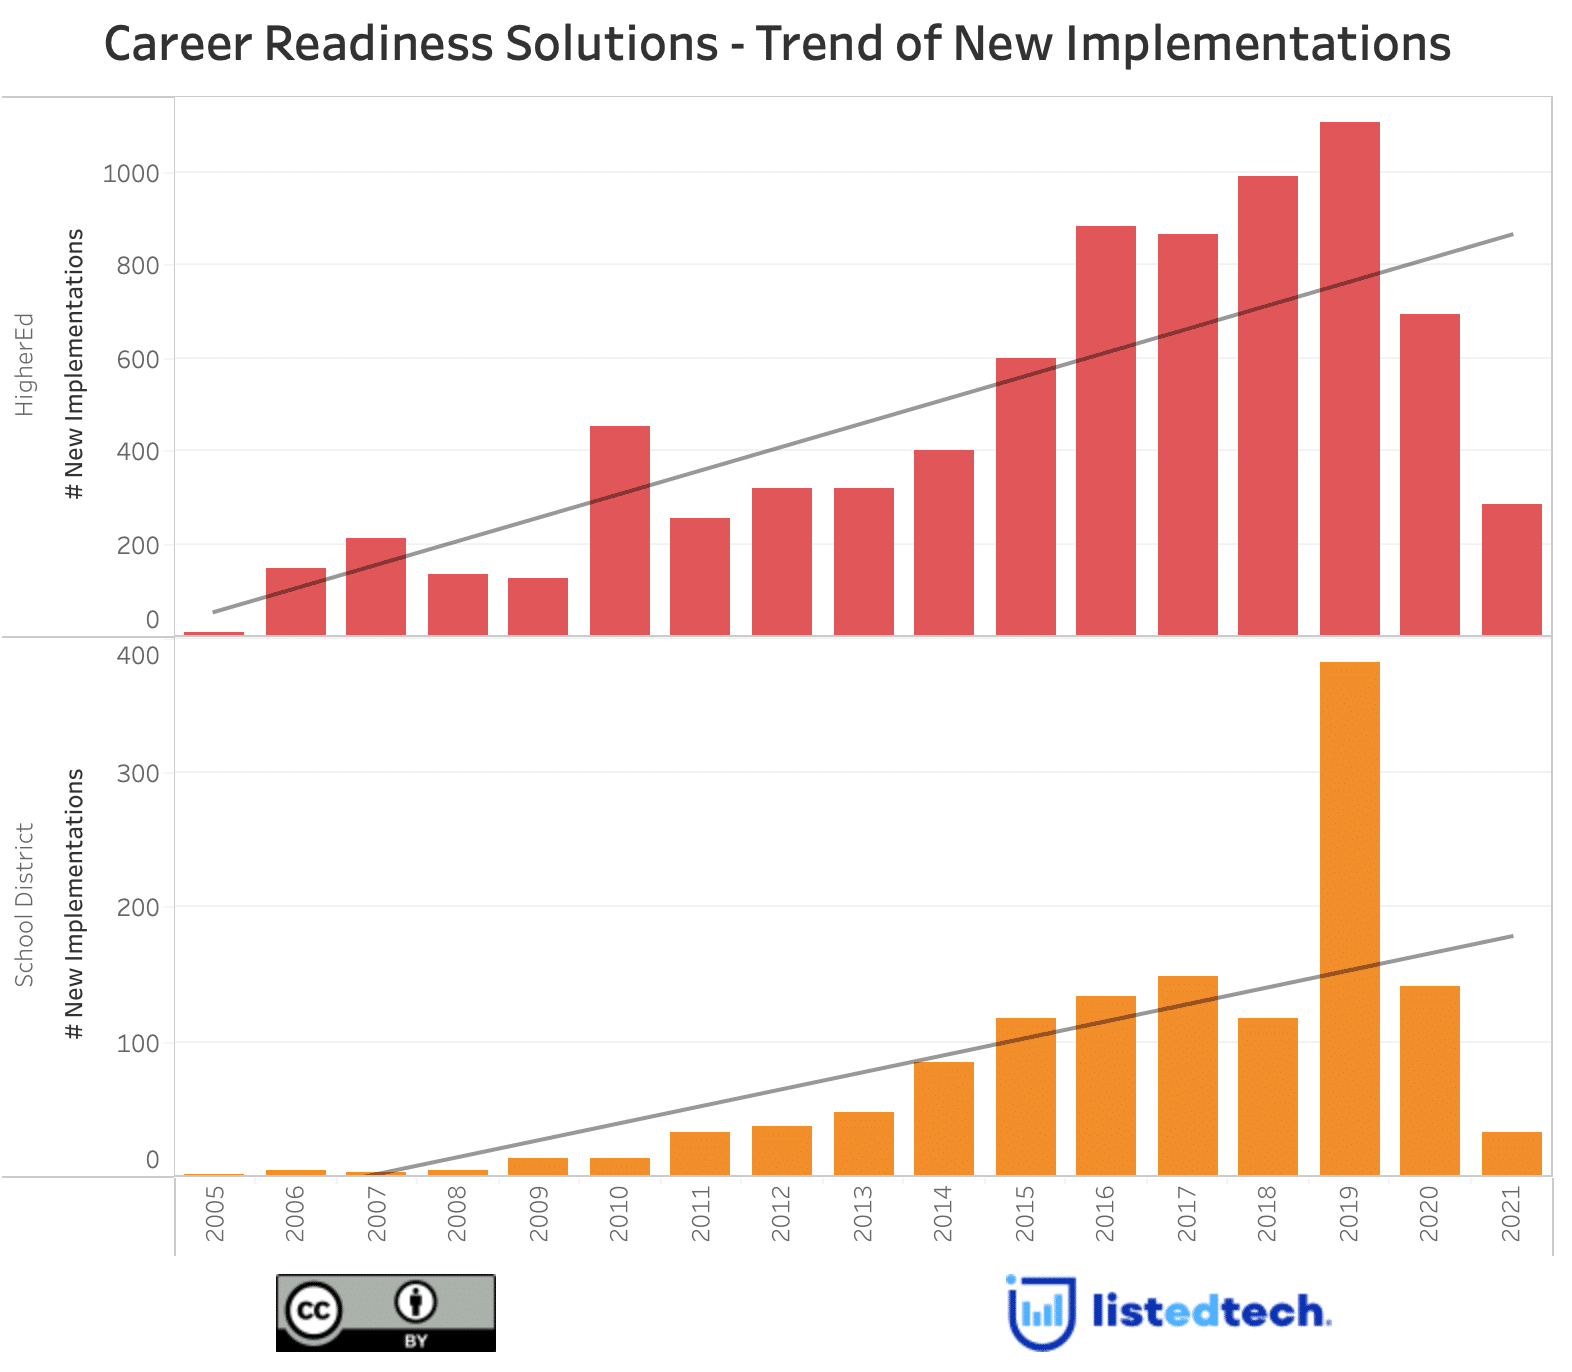 Career Readiness Solutions - Trends of New Implementations